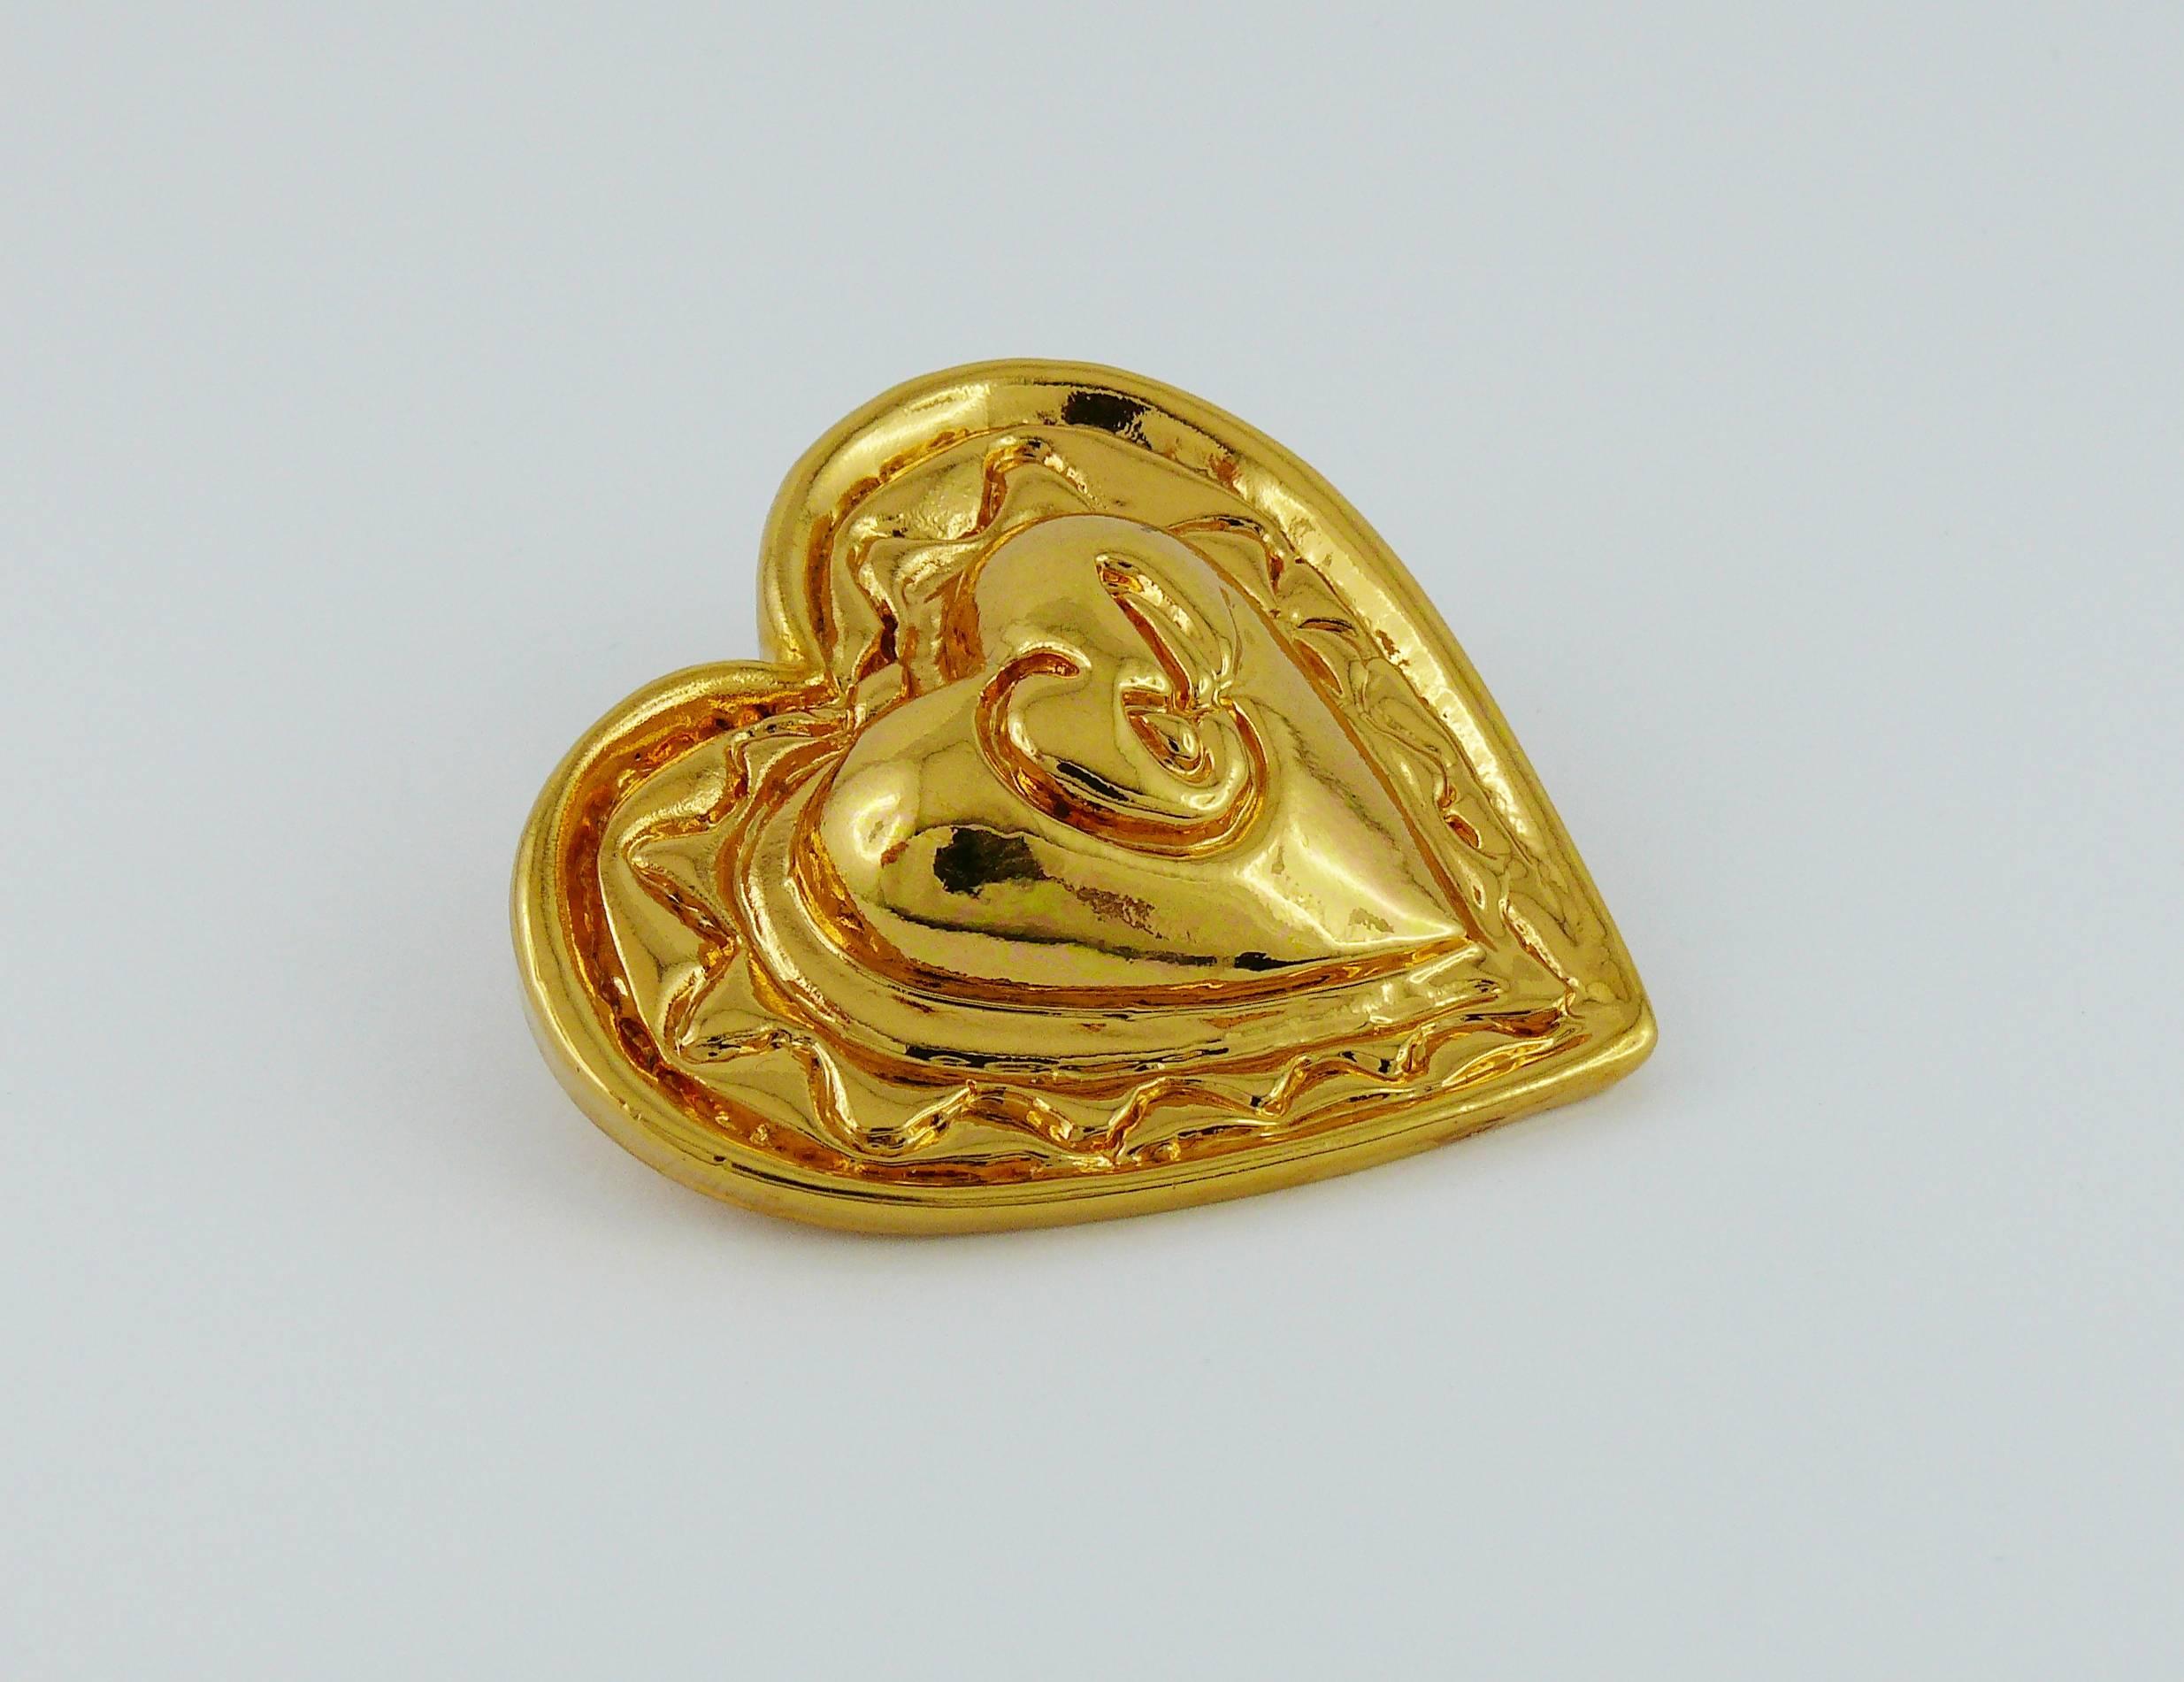 CHRISTIAN LACROIX vintage gold toned resin classic heart brooch.

Marked CHRISTIAN LACROIX CL Made in France.

Indicative measurements : length approx. 6 cm (2.36 inches) / width approx. 6.3 cm (2.48 inches).

JEWELRY CONDITION CHART
- New or never